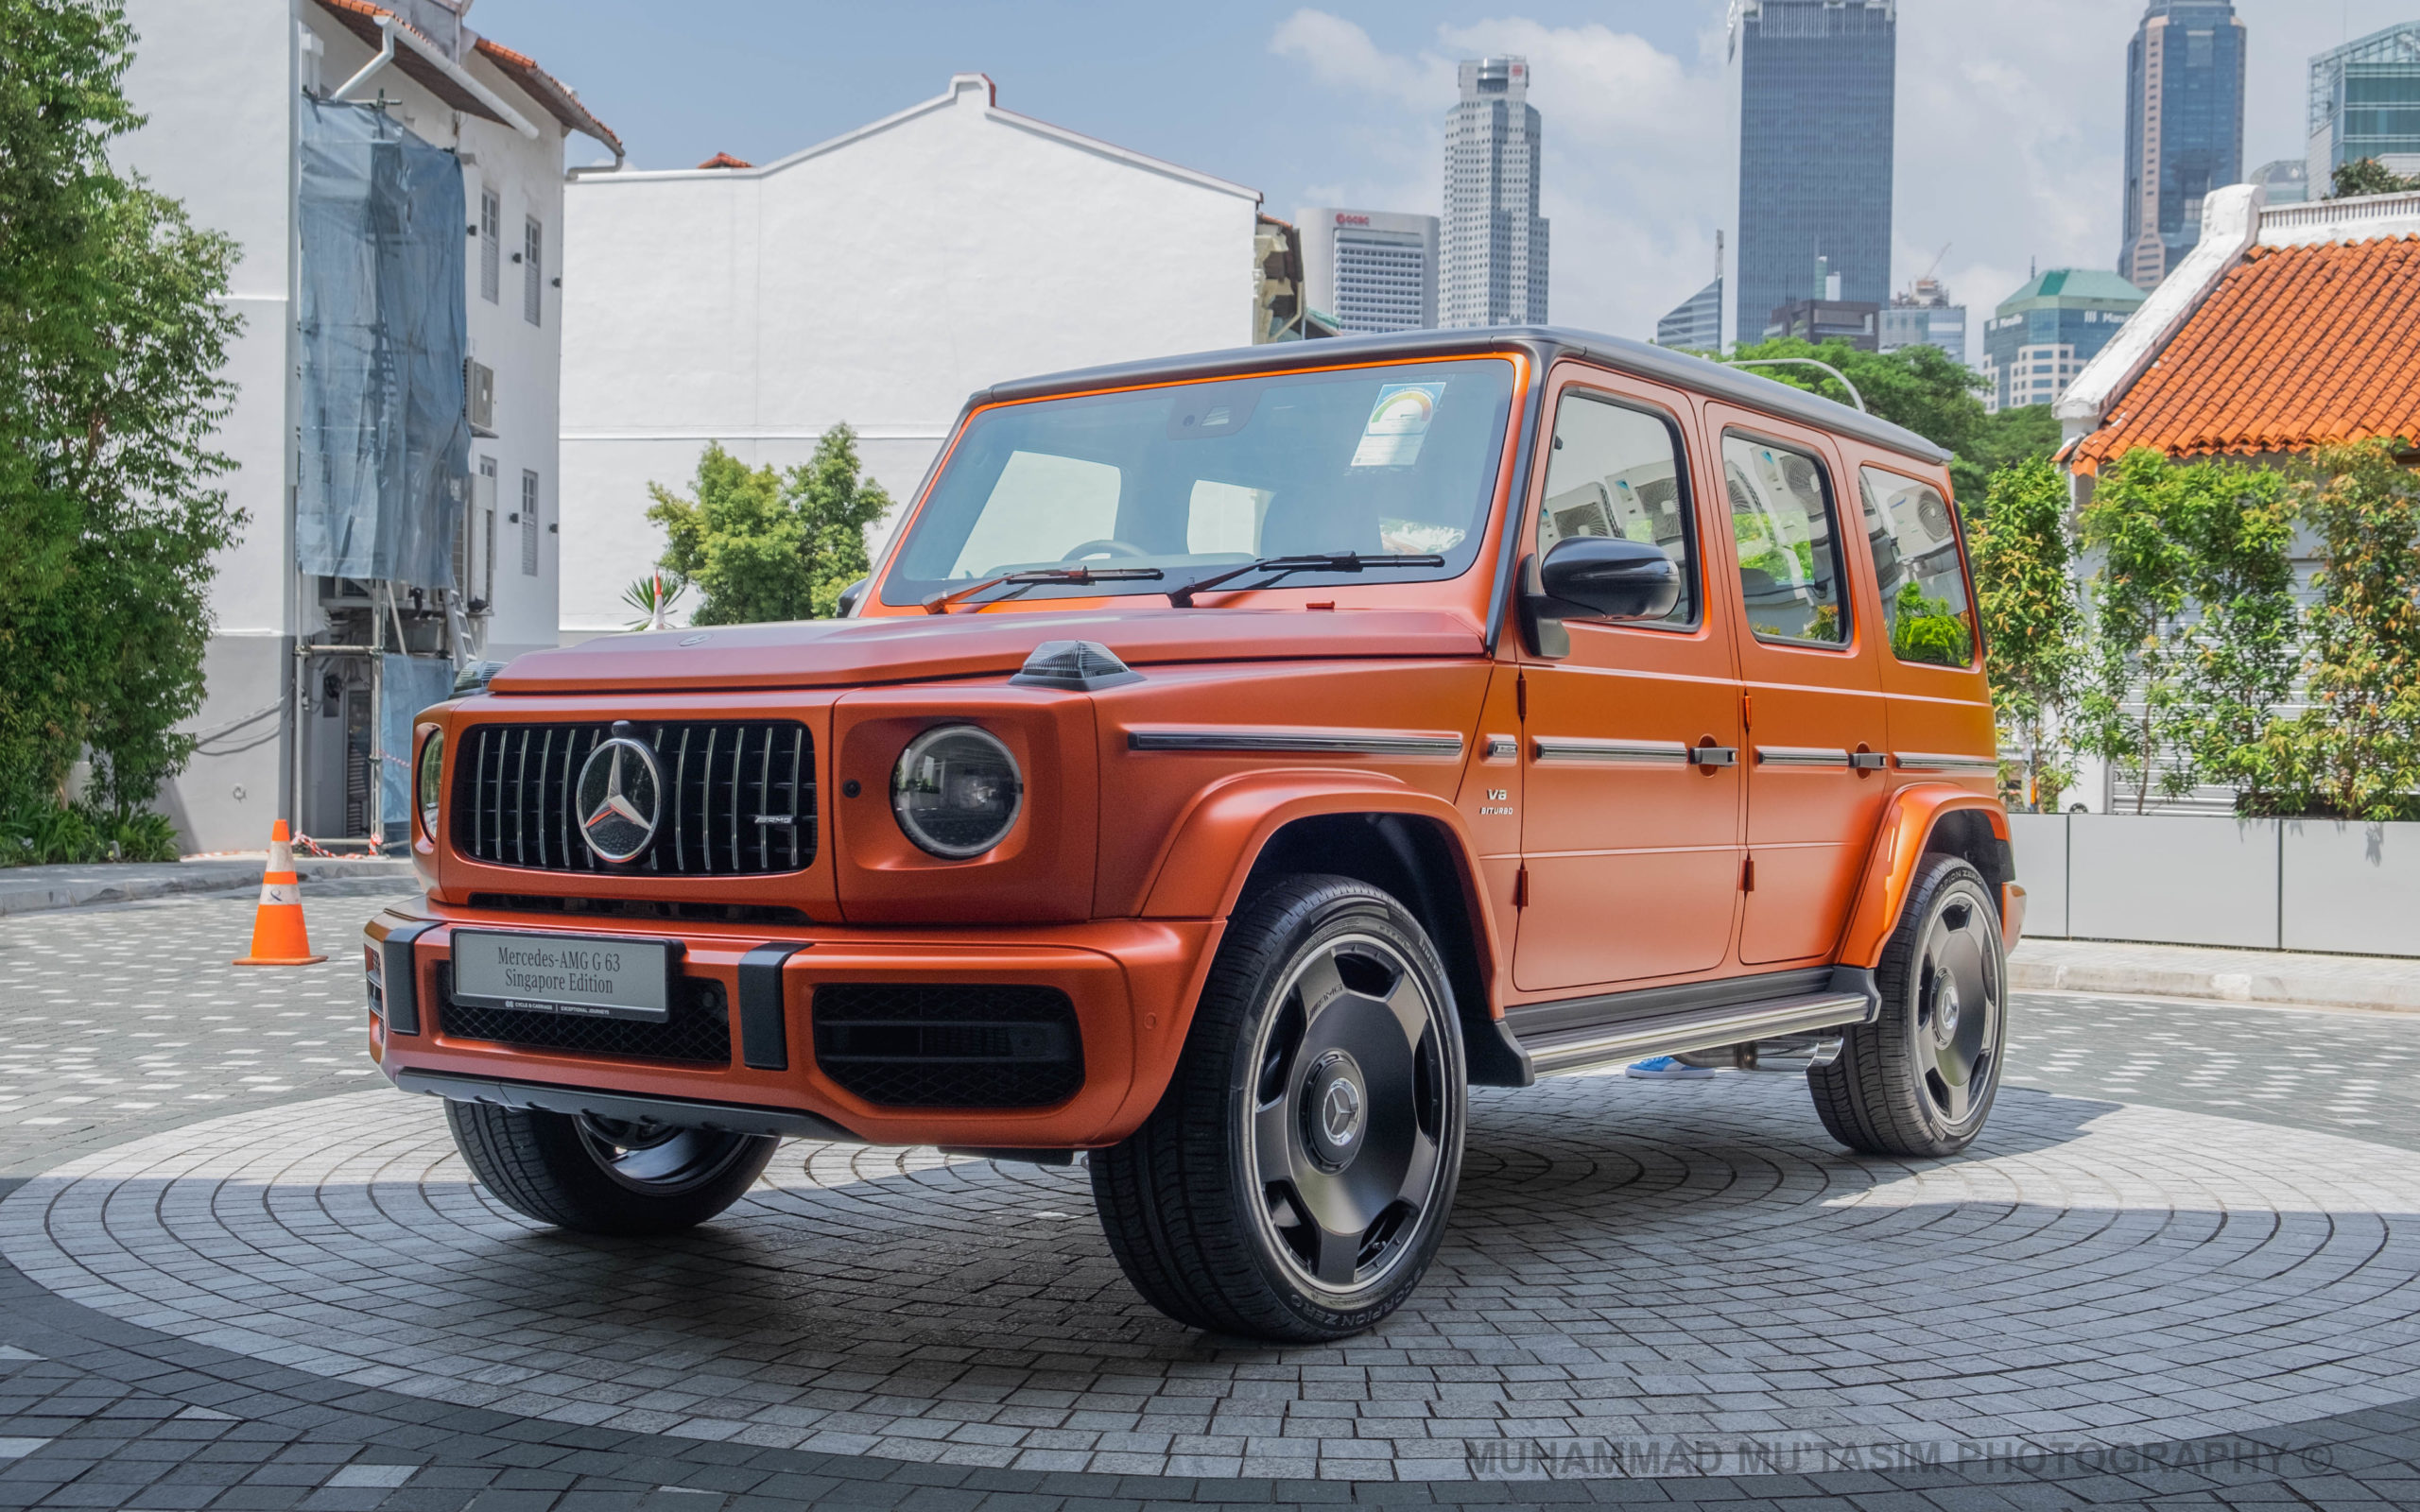 one-of-one mercedes-amg g 63 singapore edition arrives on our shores